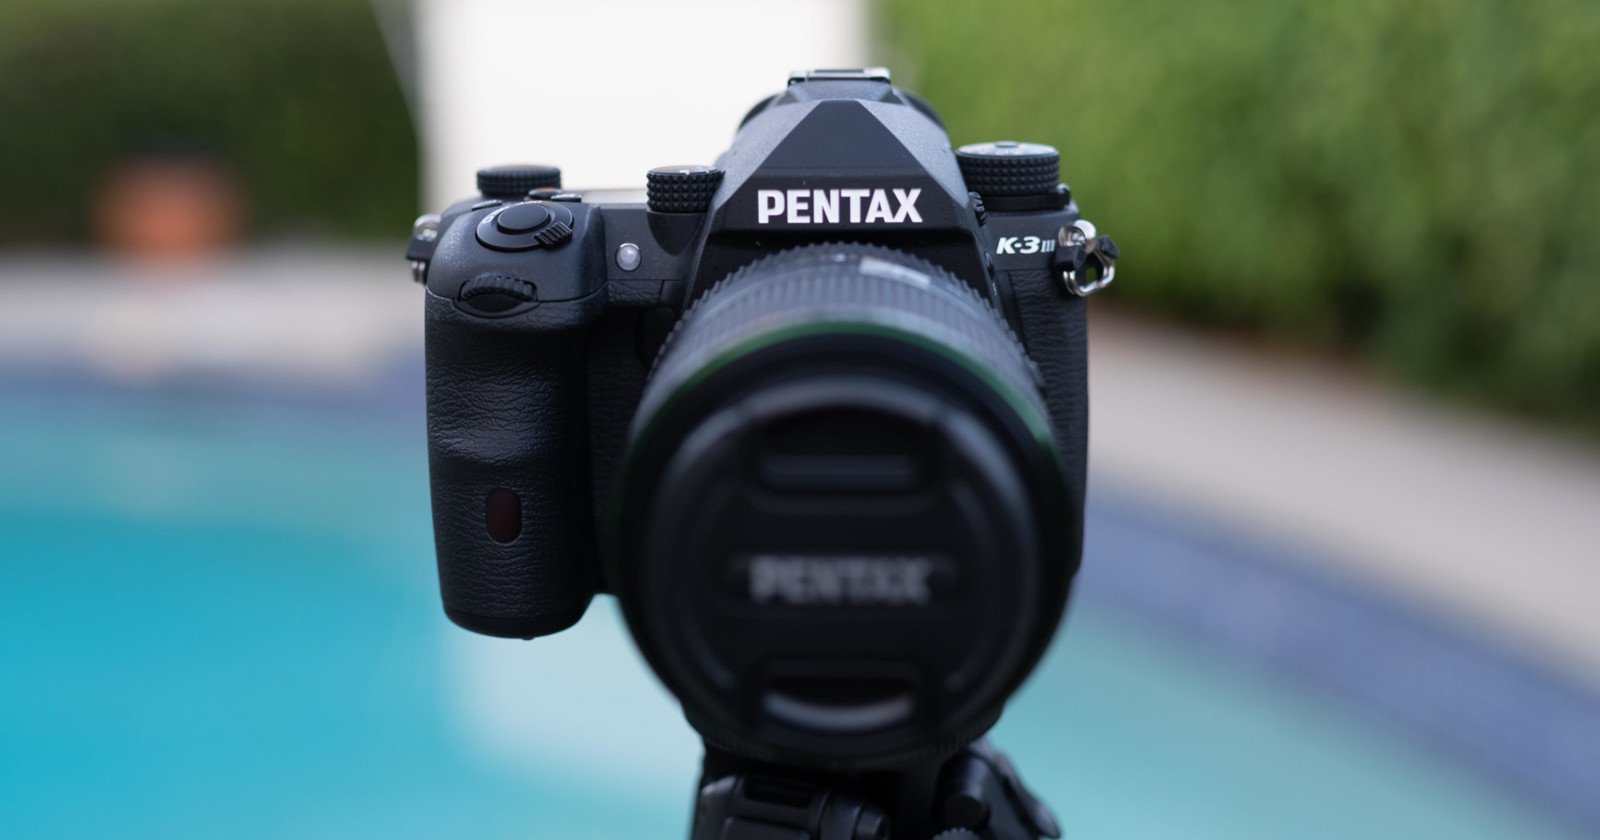 Ricoh Explains Its New Workshop-Like Business Plan for Pentax